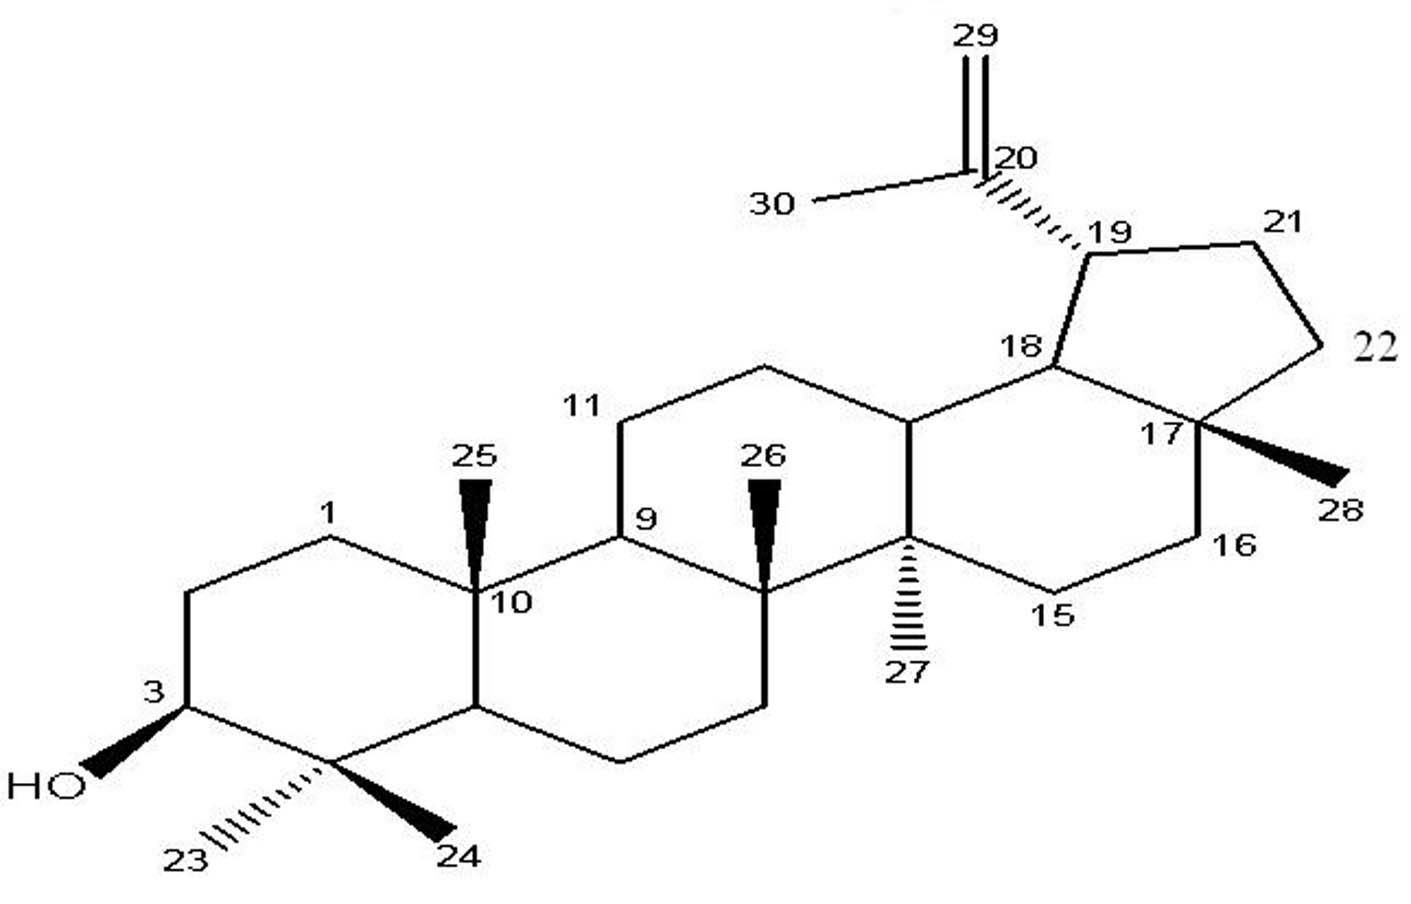 Triterpenoid-based compound used as a virus inhibitor